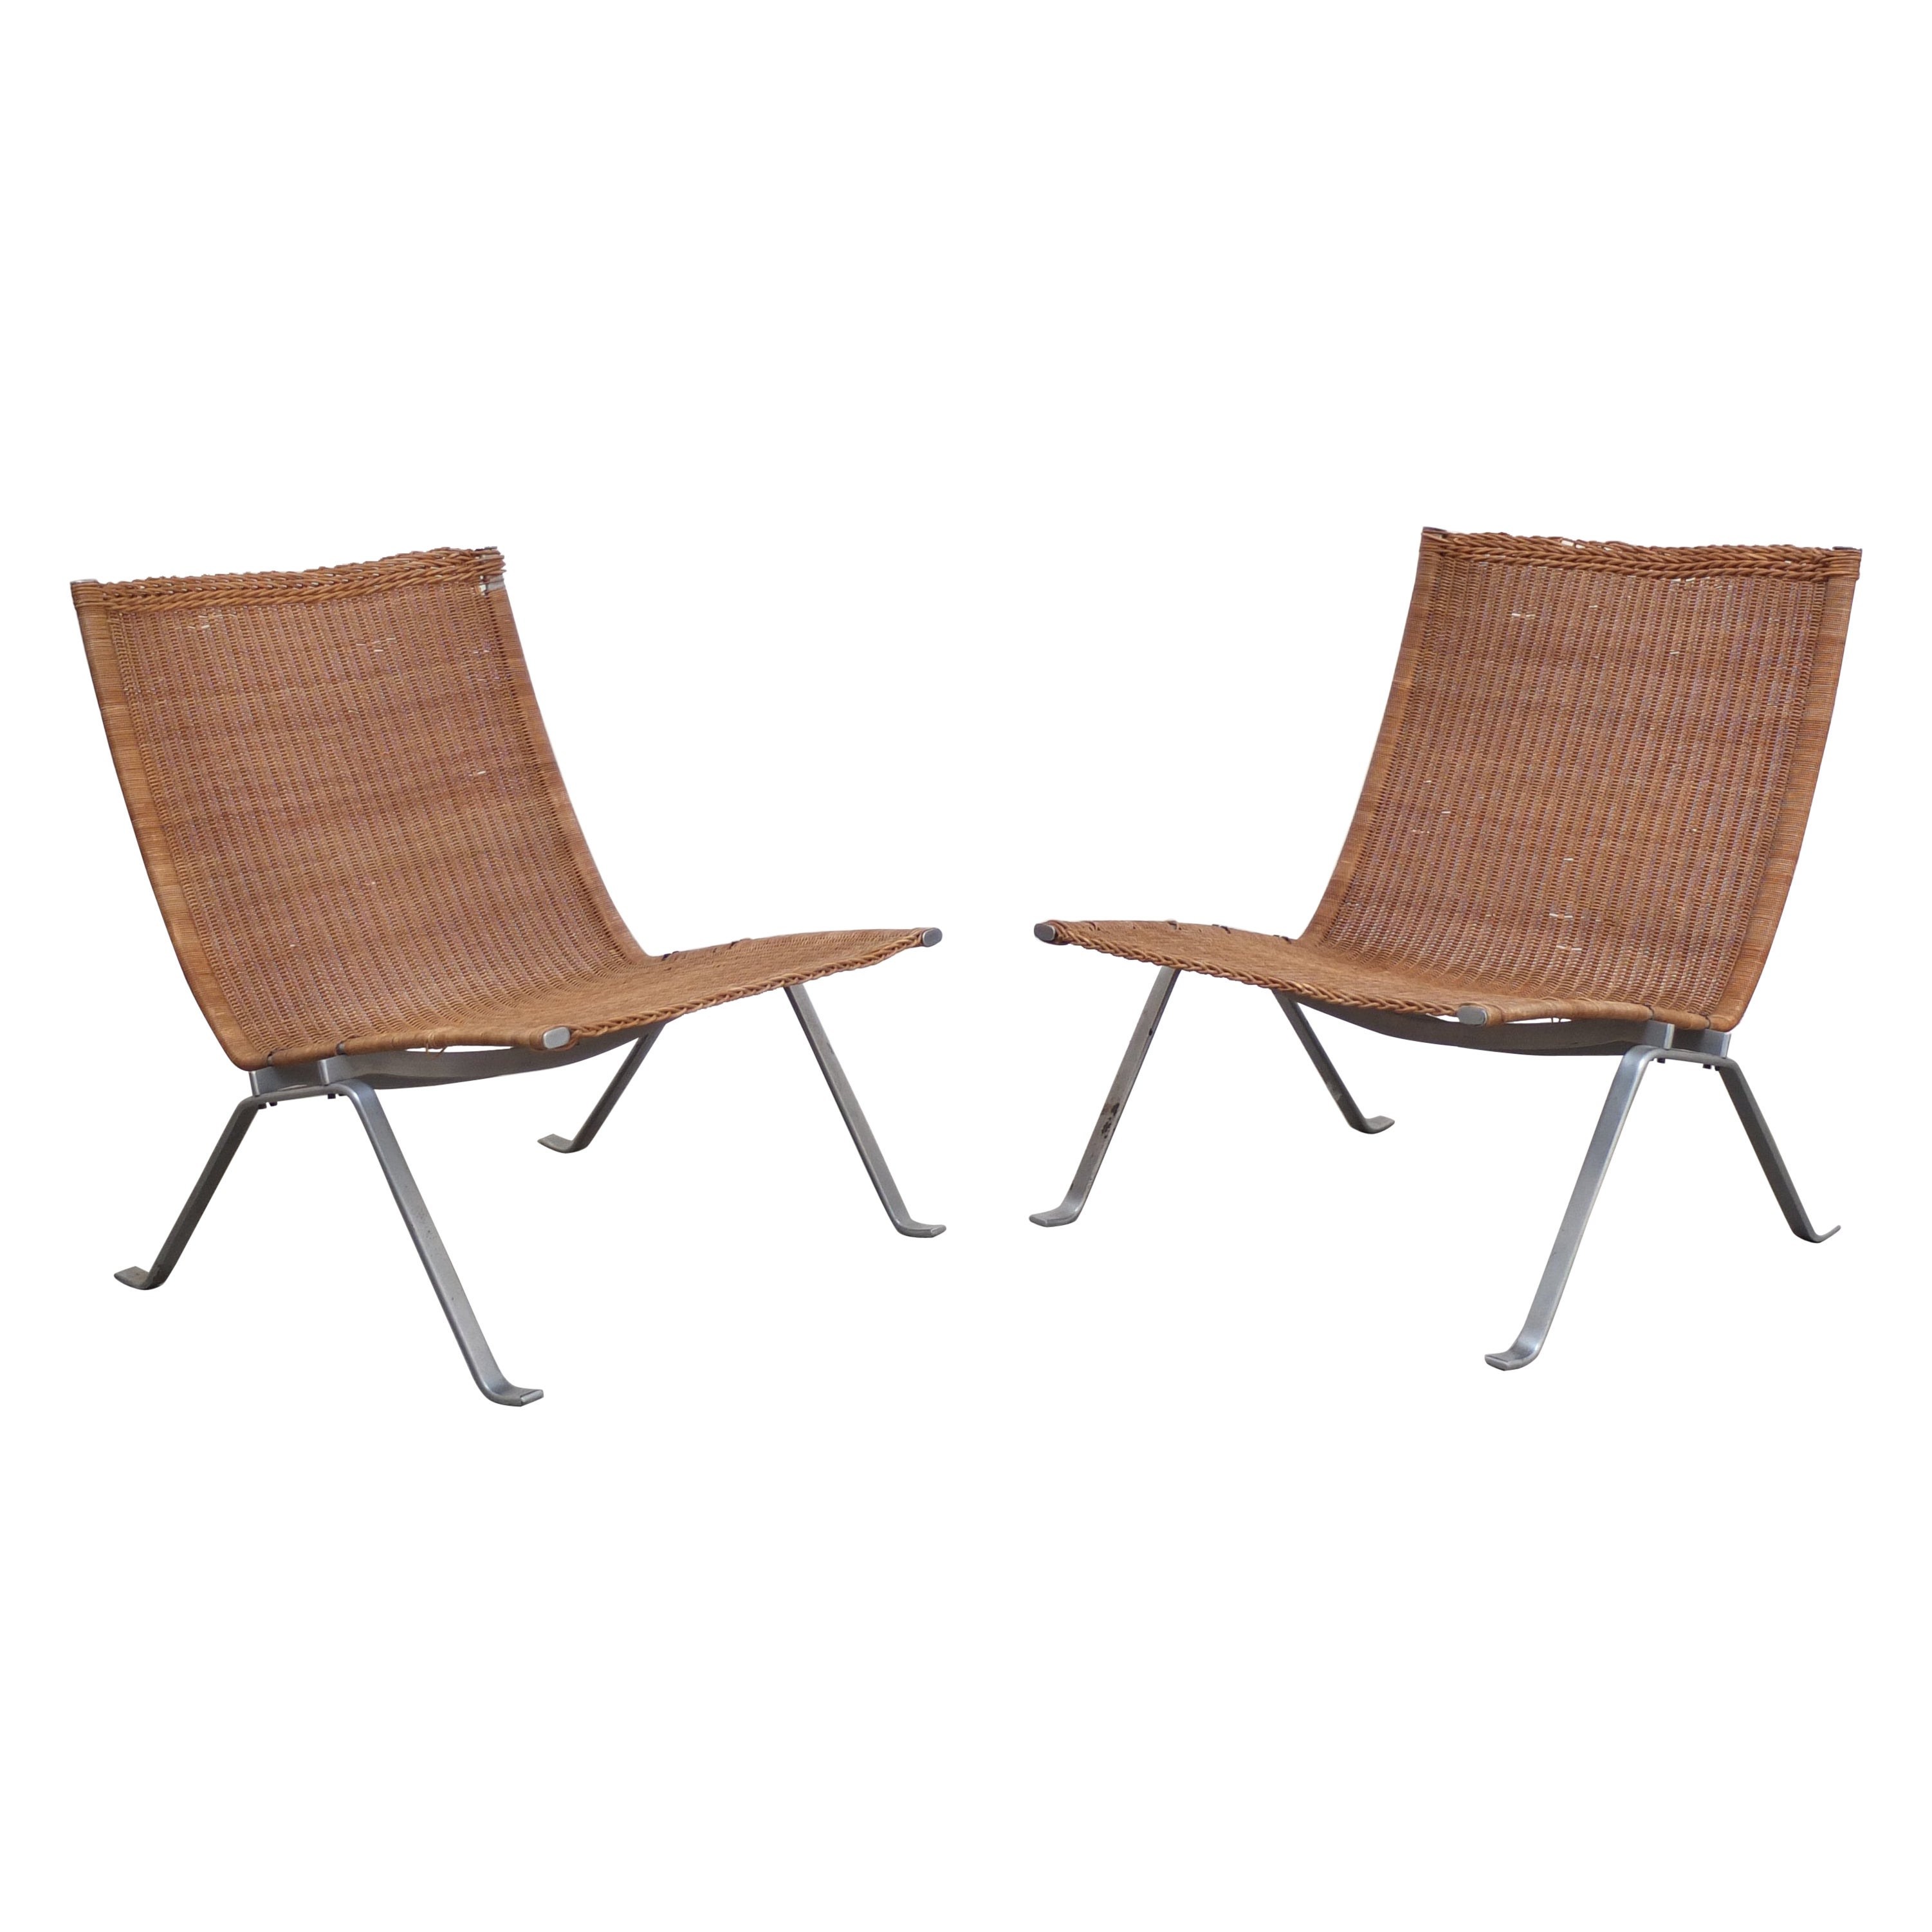 1st Edition Pair of 'PK22' Chairs by Poul Kjærholm for E. Kold Christensen, 1958